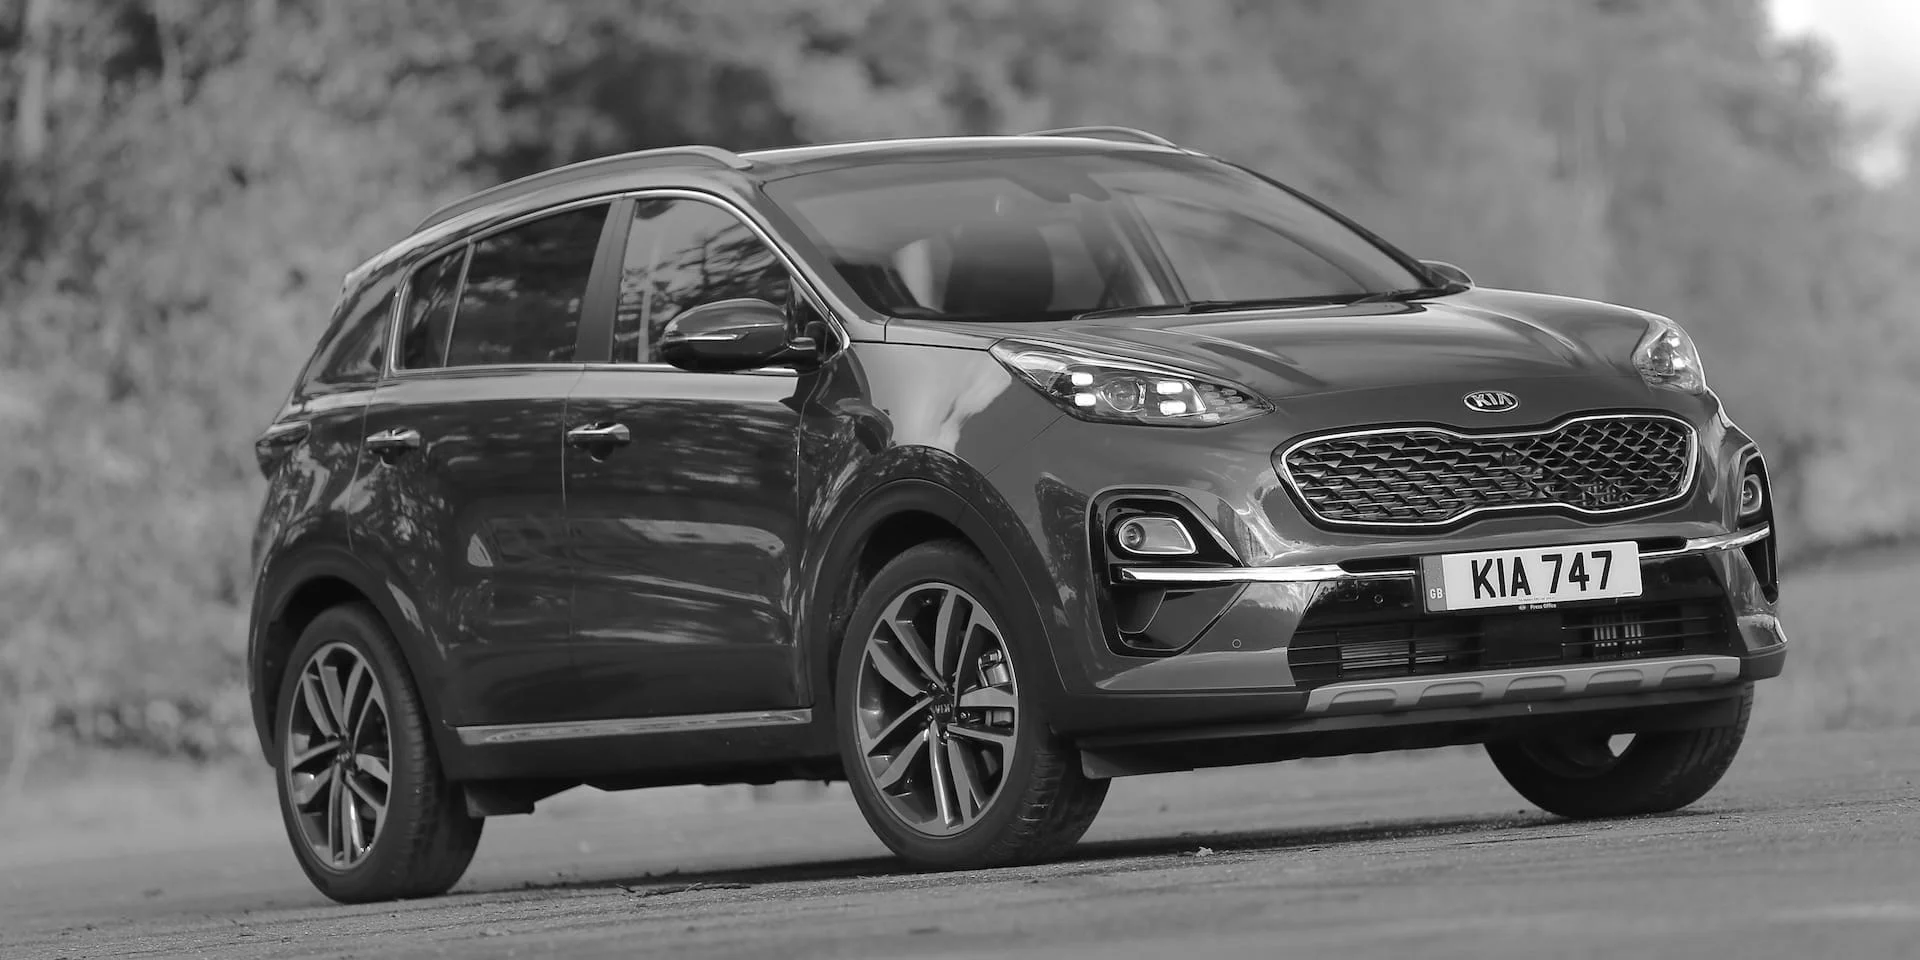 2018 Kia Sportage Review, Ratings, Specs, Prices, and Photos - The